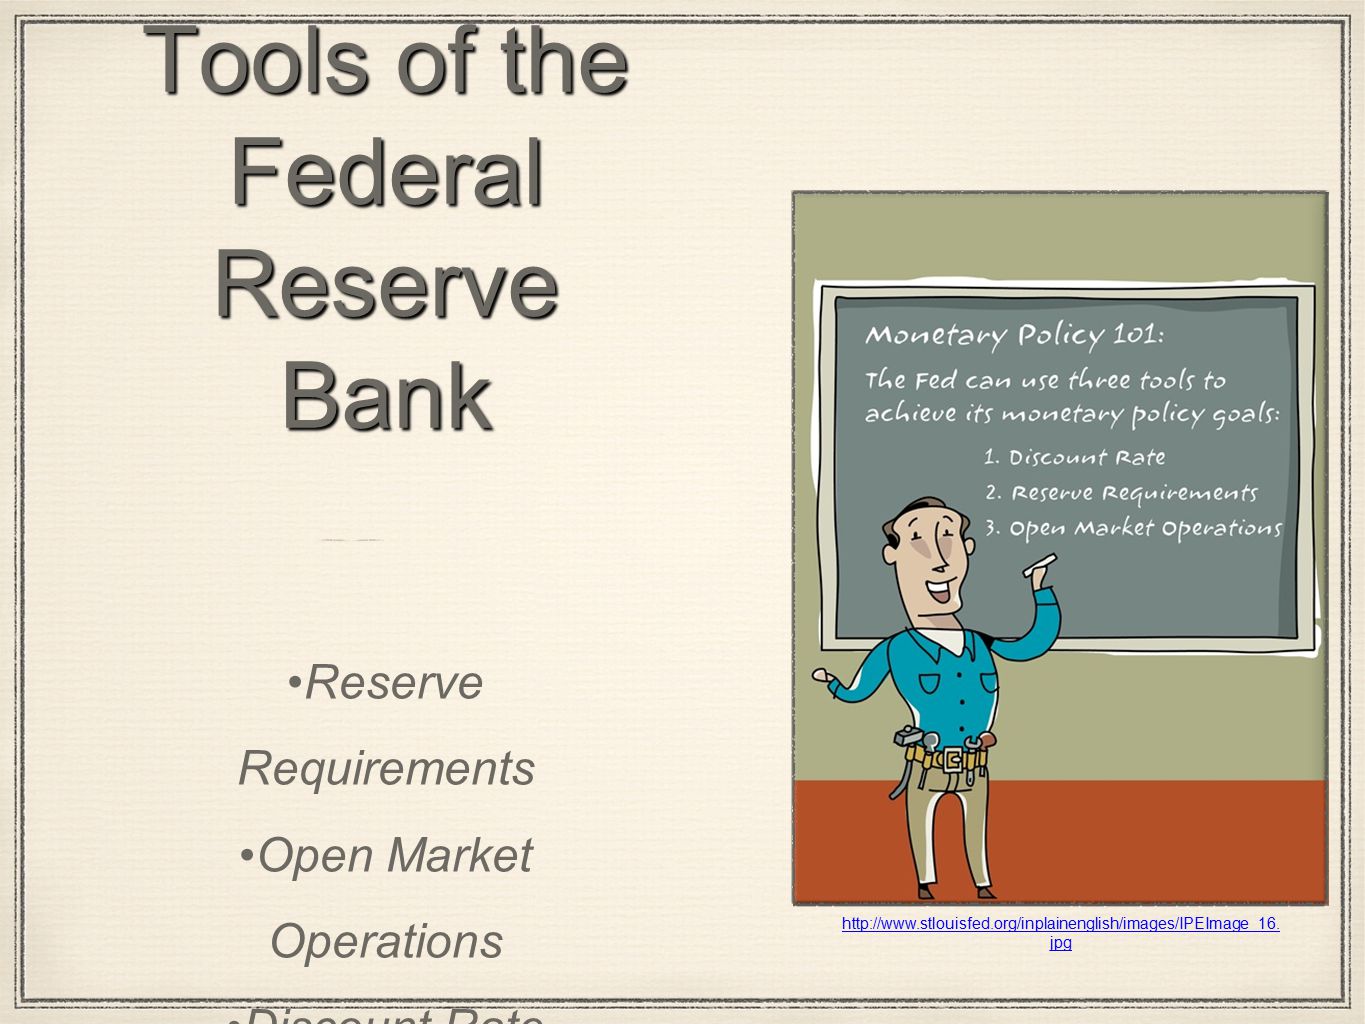 Tools of the Federal Reserve Bank Reserve Requirements Open Market Operations Discount Rate